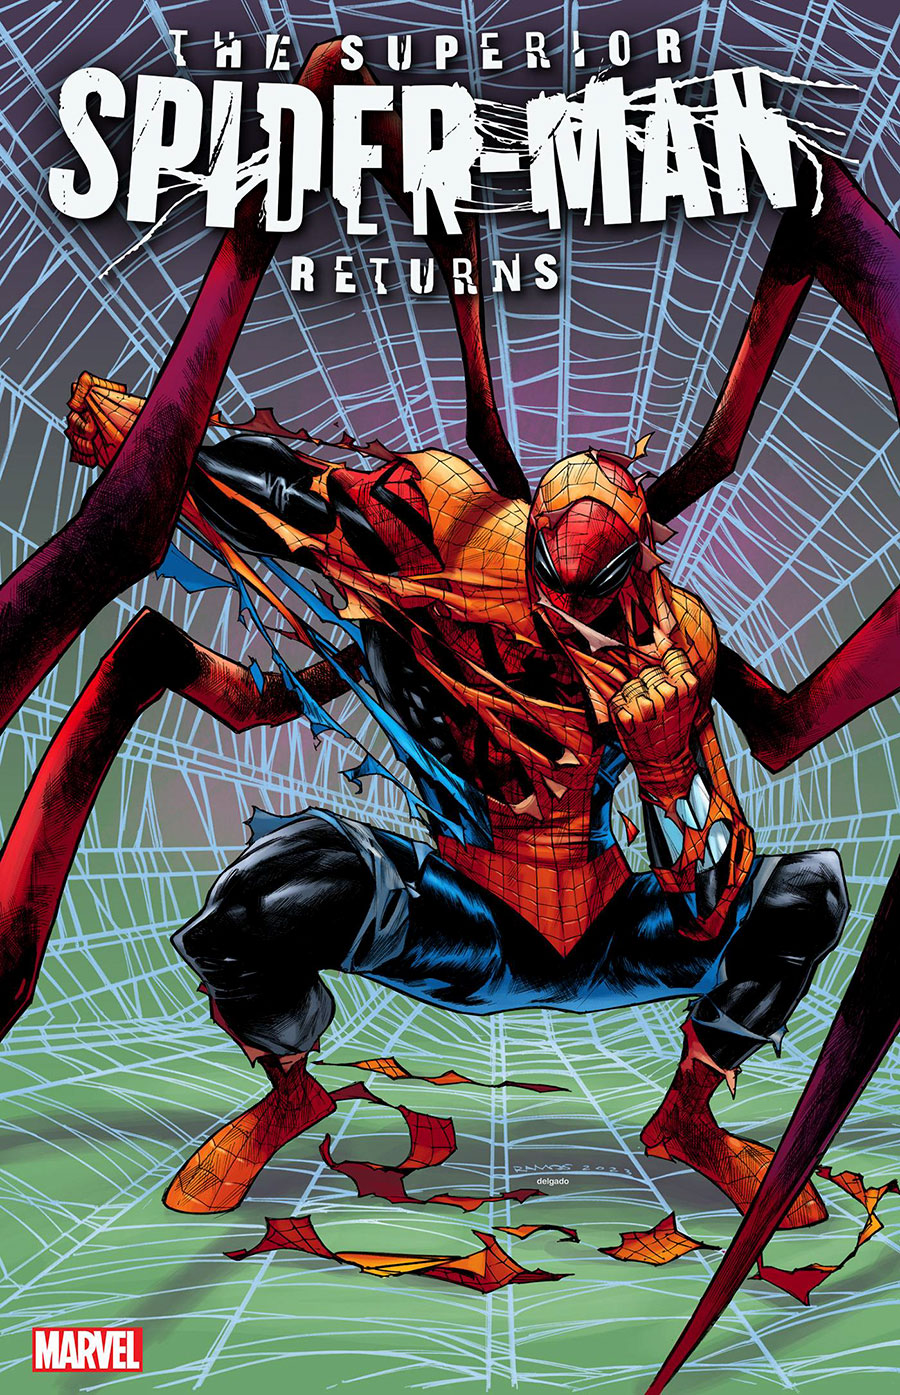 Superior Spider-Man Returns #1 (One Shot) Cover C Variant Humberto Ramos Cover